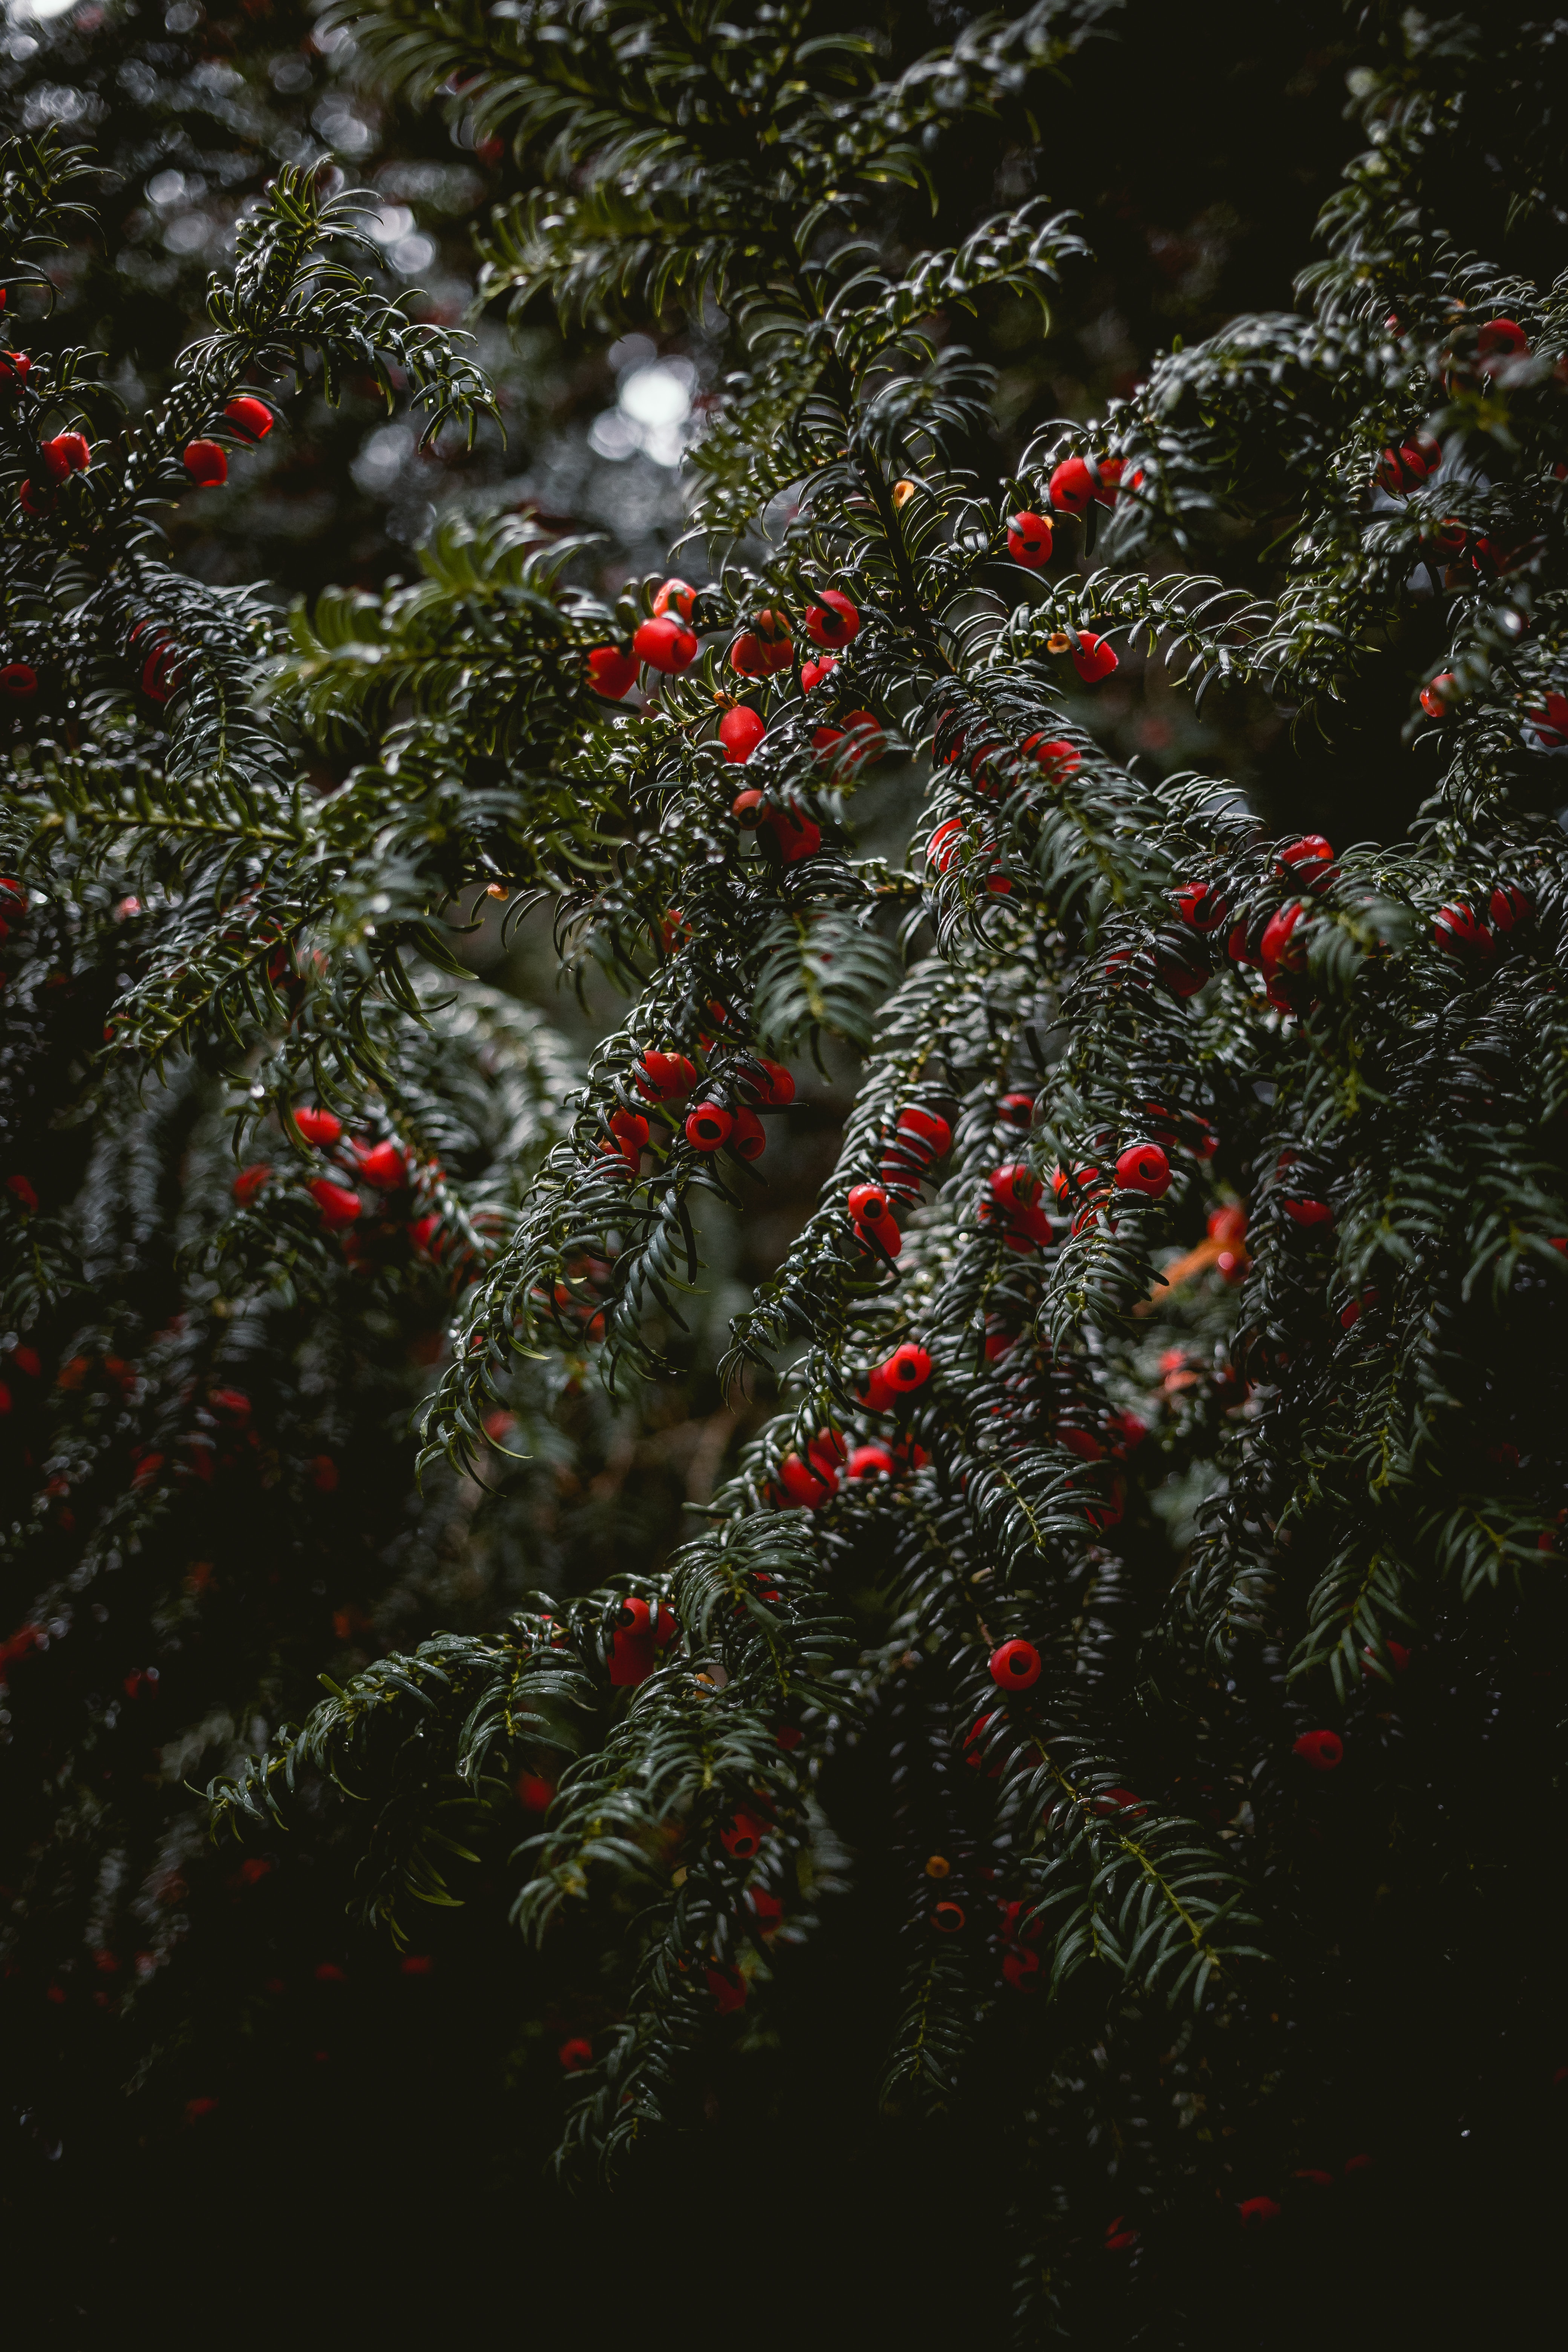 wet, nature, berries, red, plant, branches